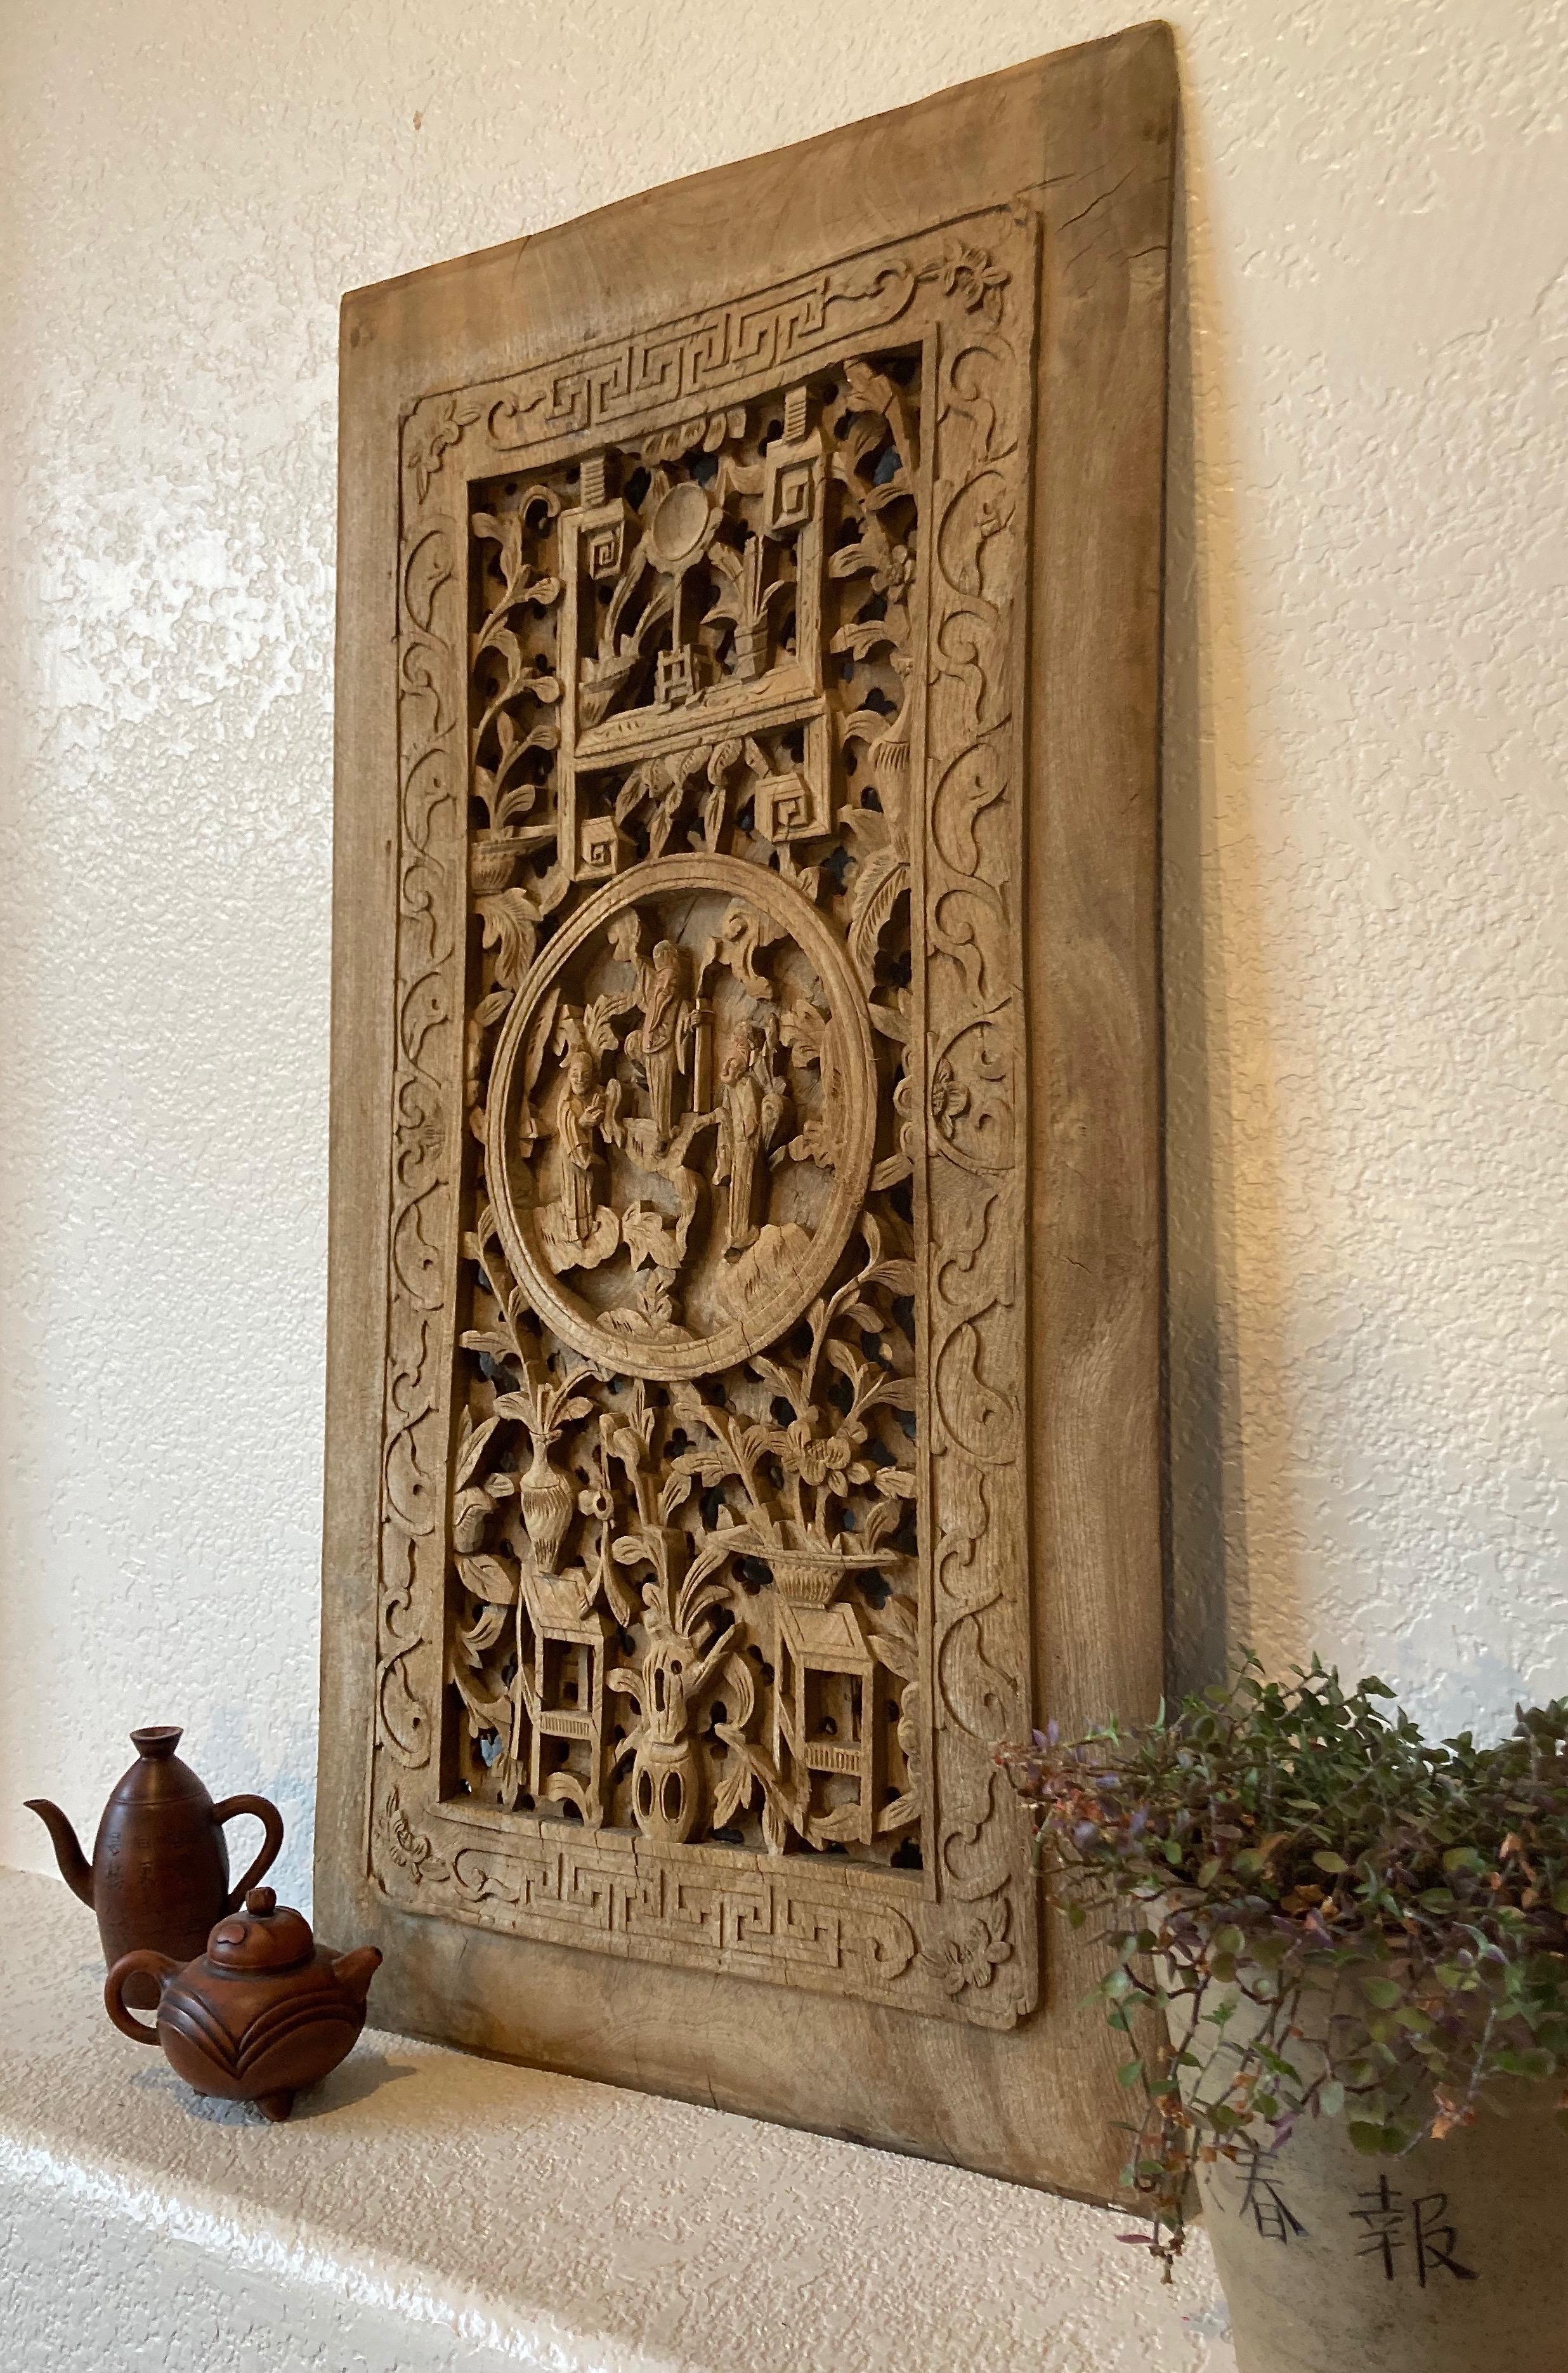 Unframed panel, hand carved from a solid piece of wood. Circular center carving with personage and floral motifs.